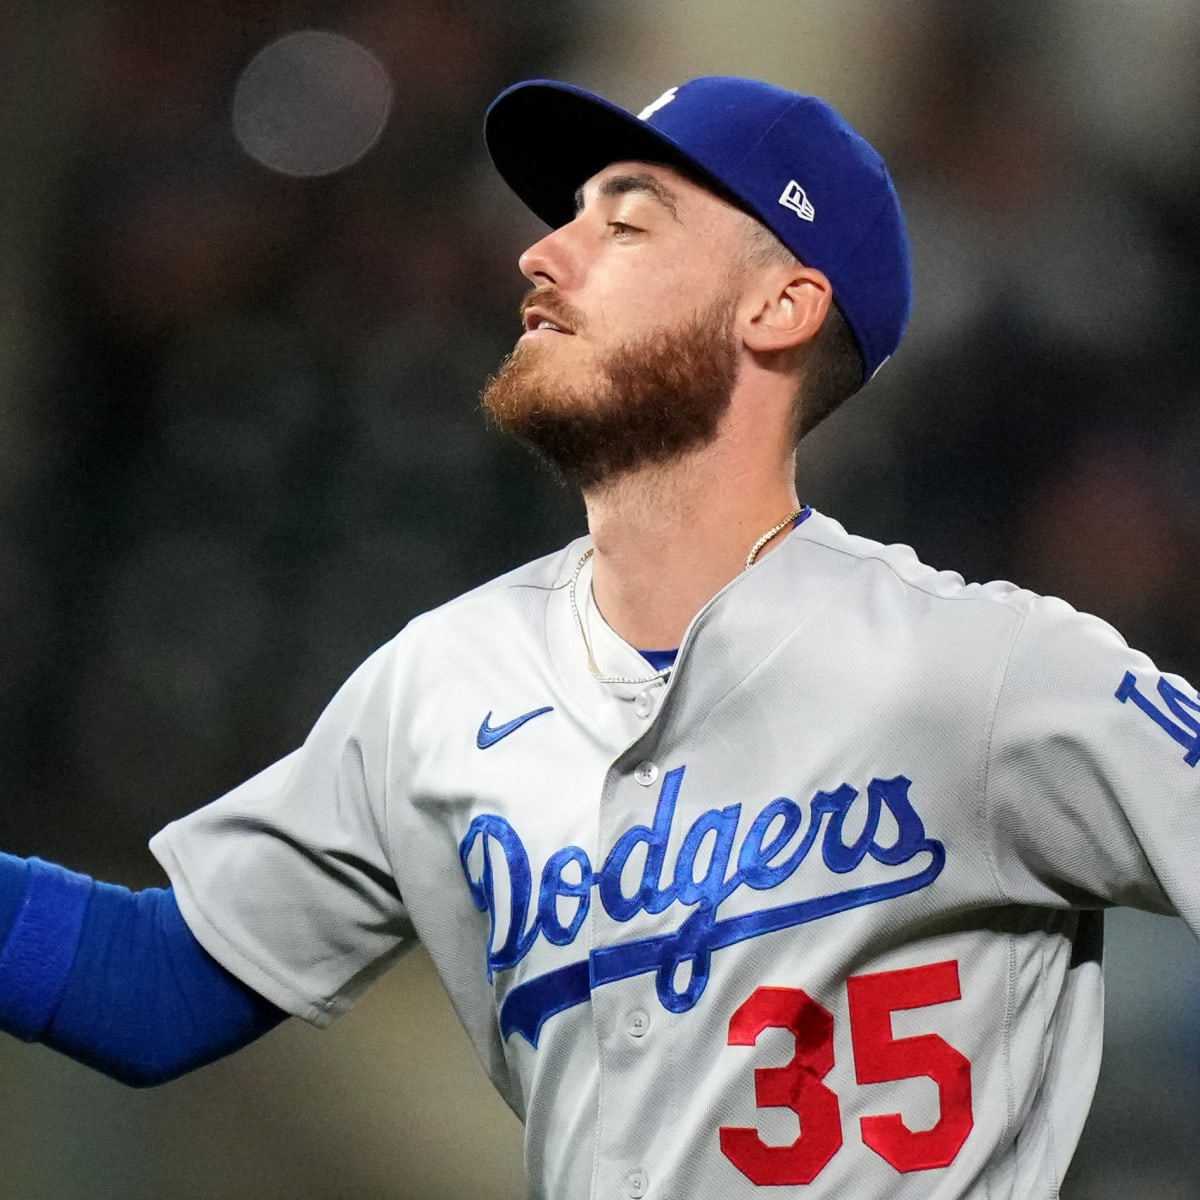 Cody Bellinger is once again a critical component of the Dodgers